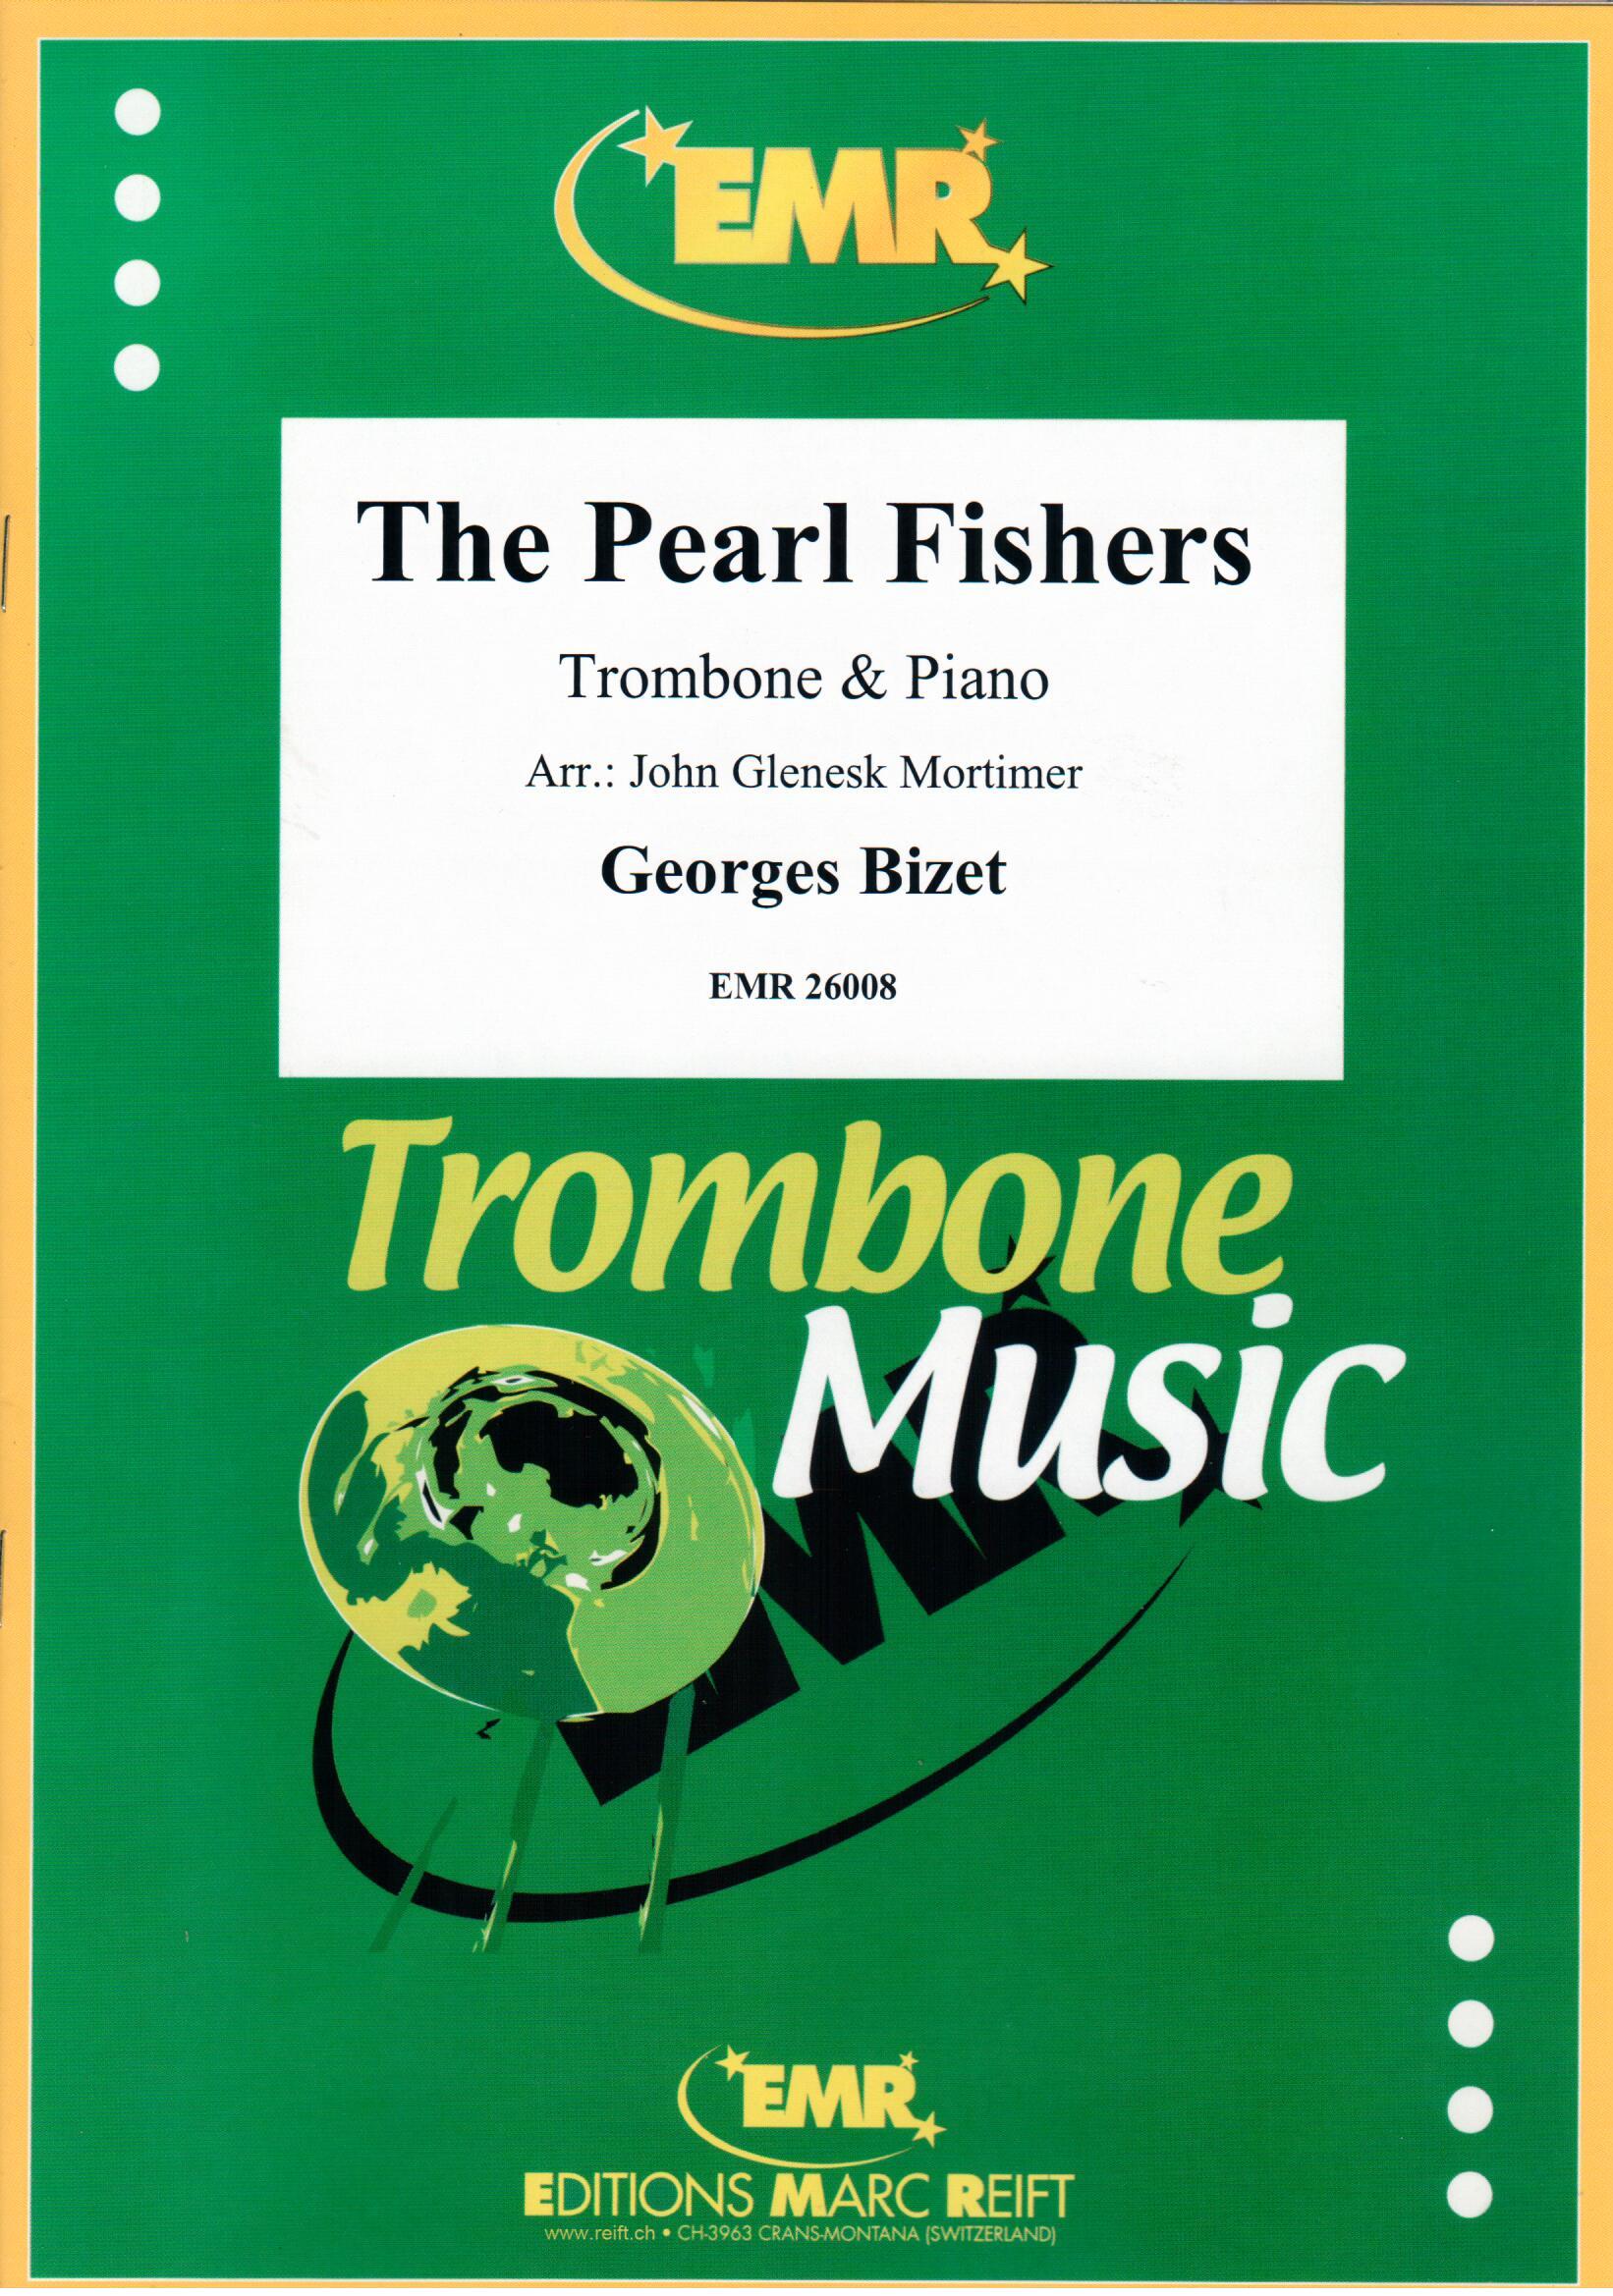 THE PEARL FISHERS, SOLOS - Trombone